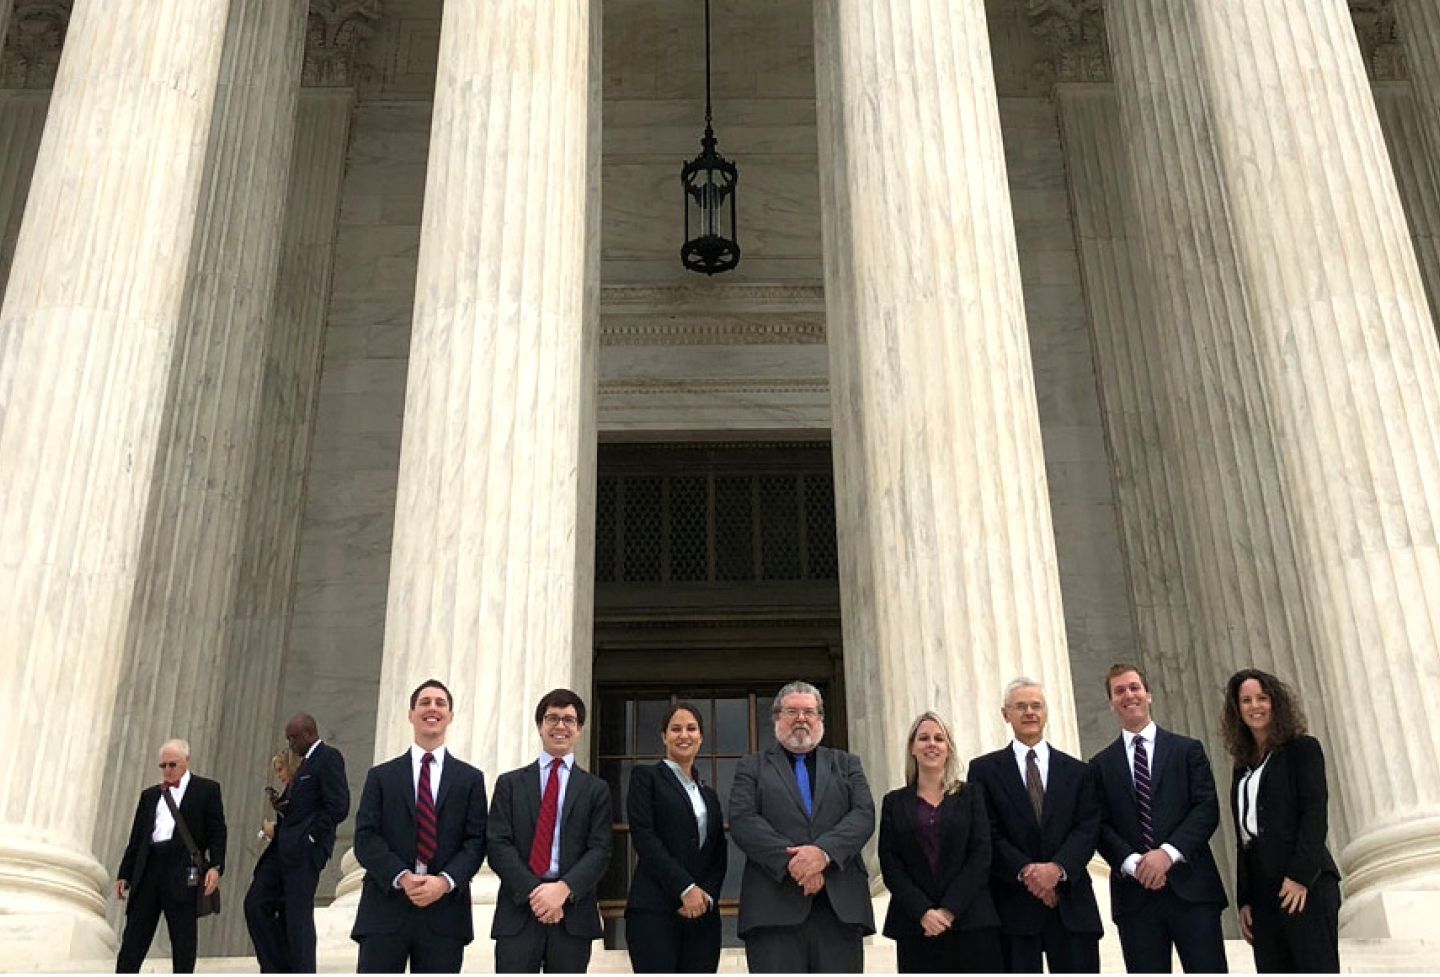 The Supreme Court Litigation Clinic won a unanimous decision in January that may benefit Social Security claimants. Professor Daniel Ortiz, the clinic’s director, presented oral argument.